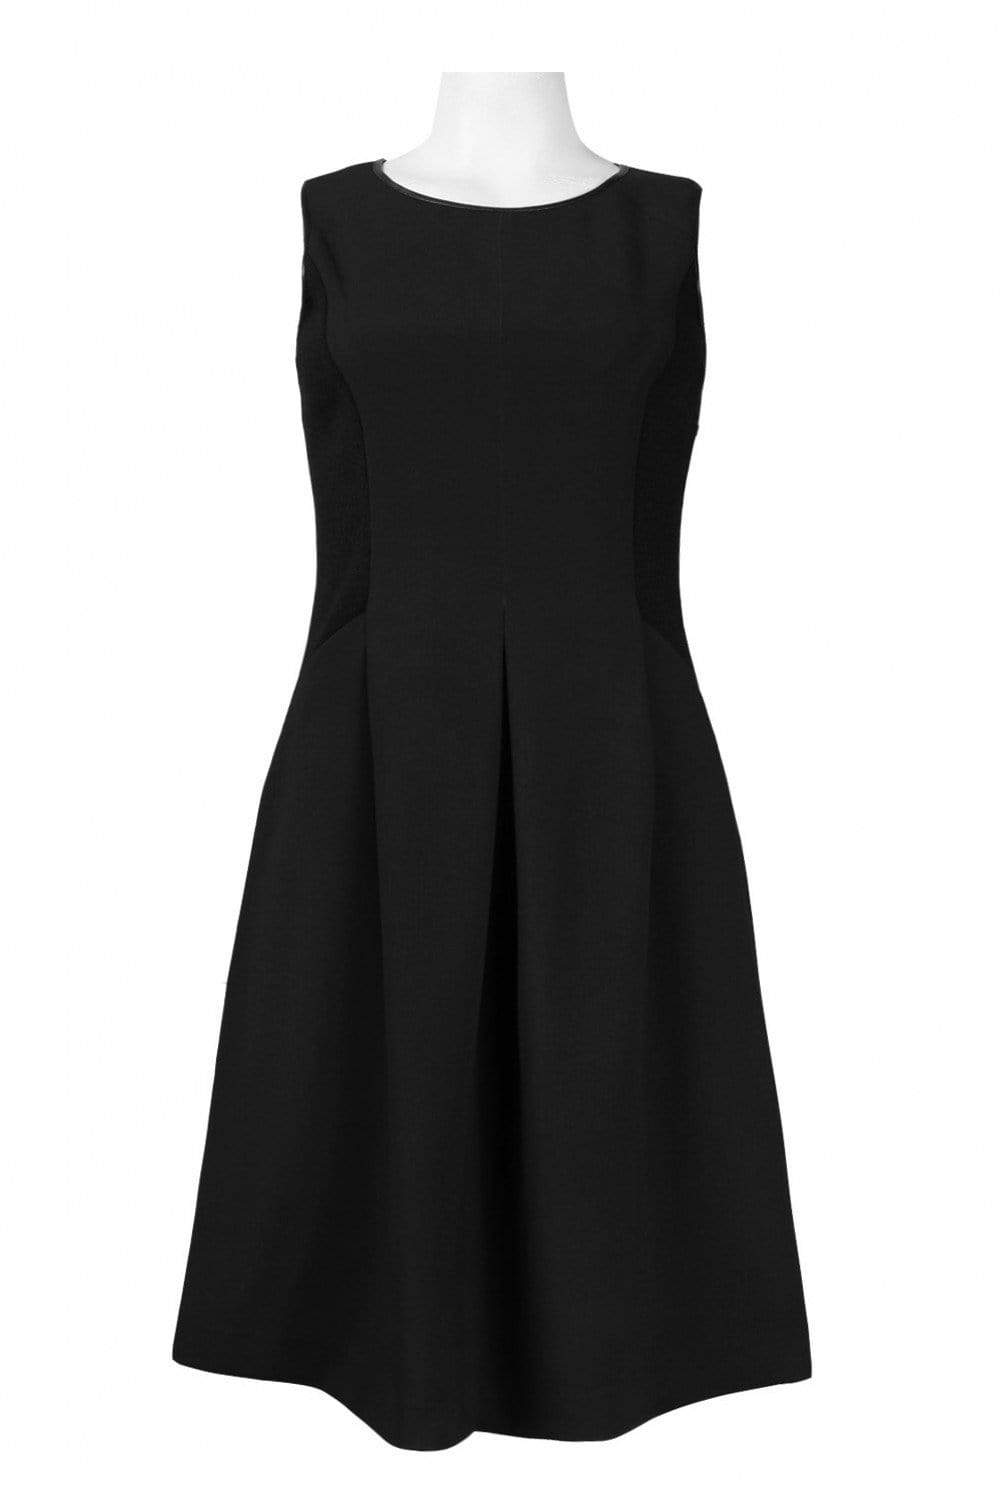 Adrianna Papell Daytime - 16PD78240 Sleeveless Crepe A-line Dress
